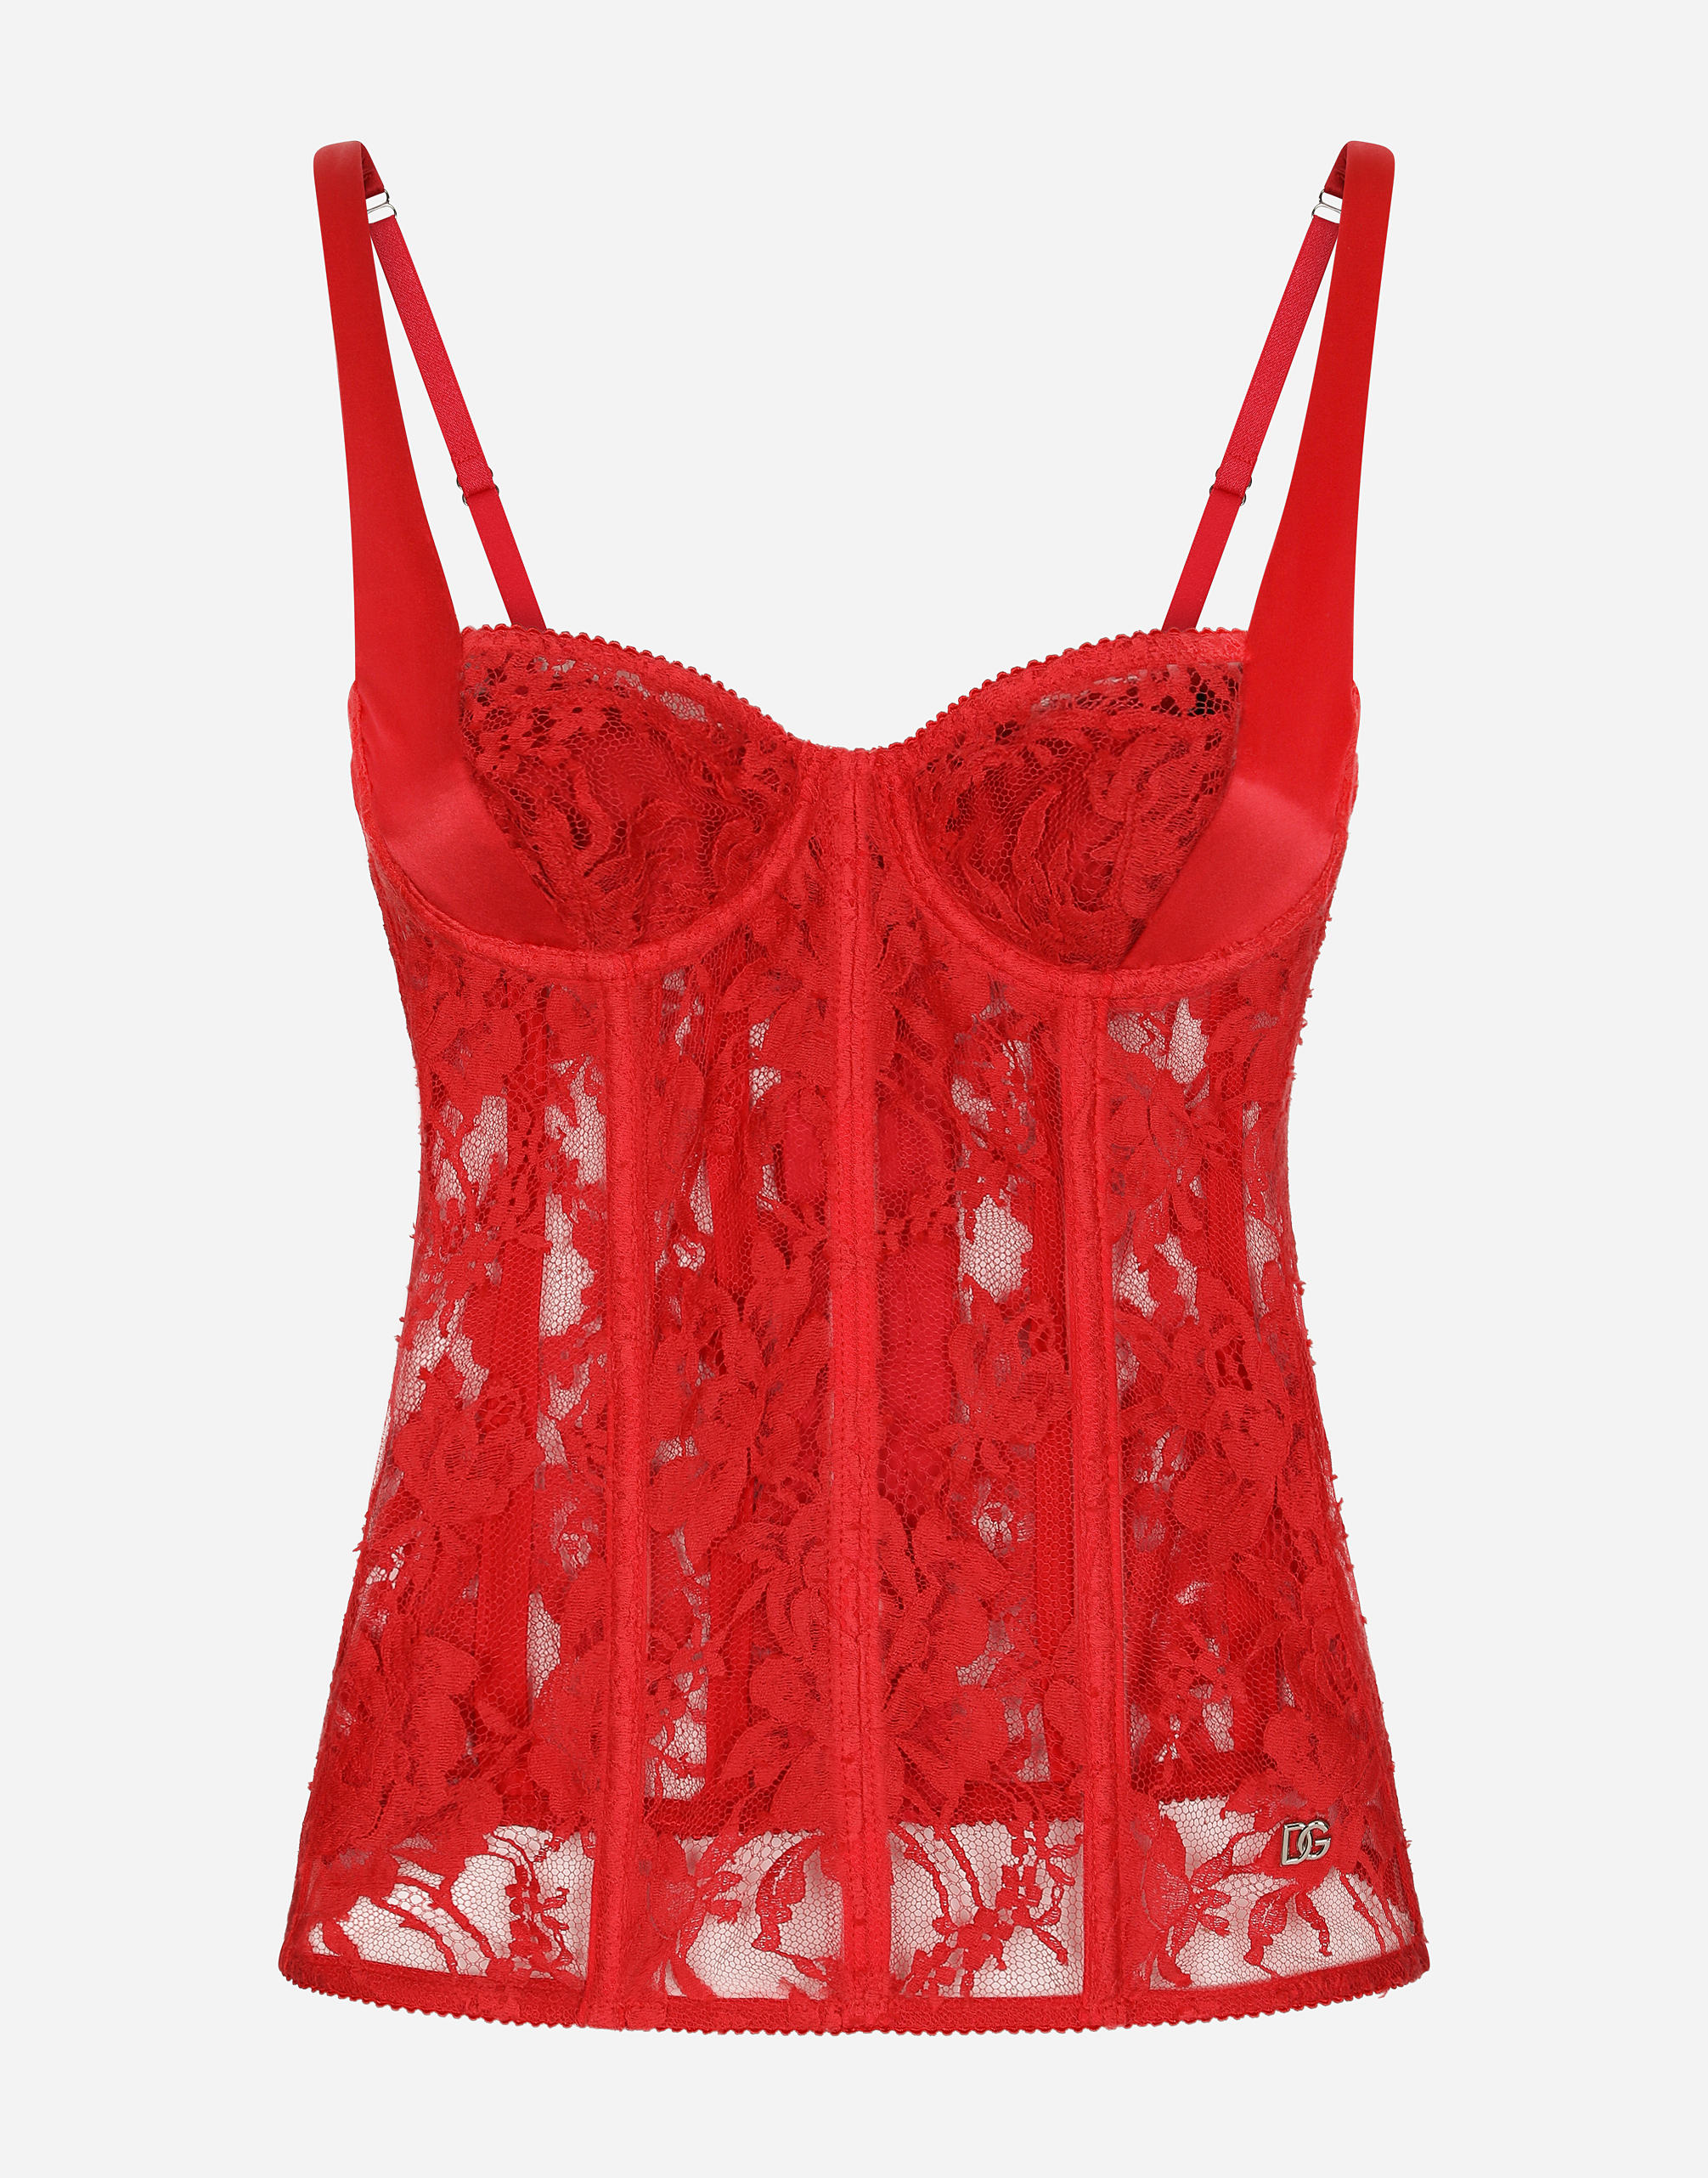 Dolce & Gabbana Lace Lingerie Corset In Nail_red